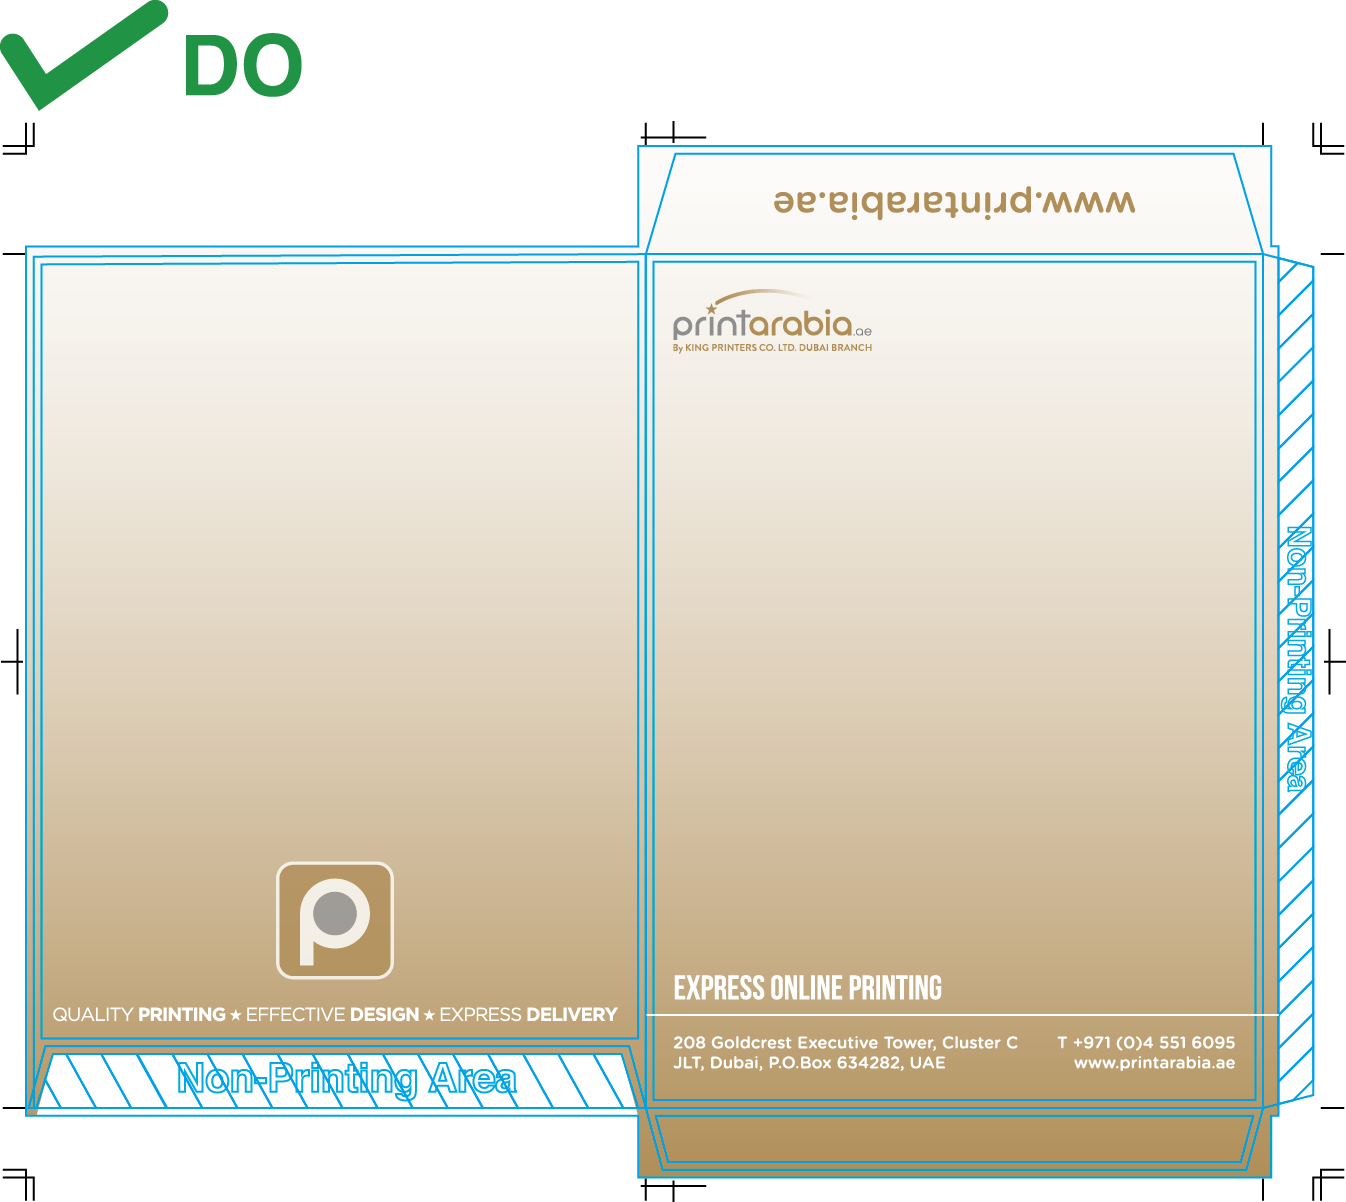 Custom Envelopes - Do's and Don'ts when laying out your design 04 Image